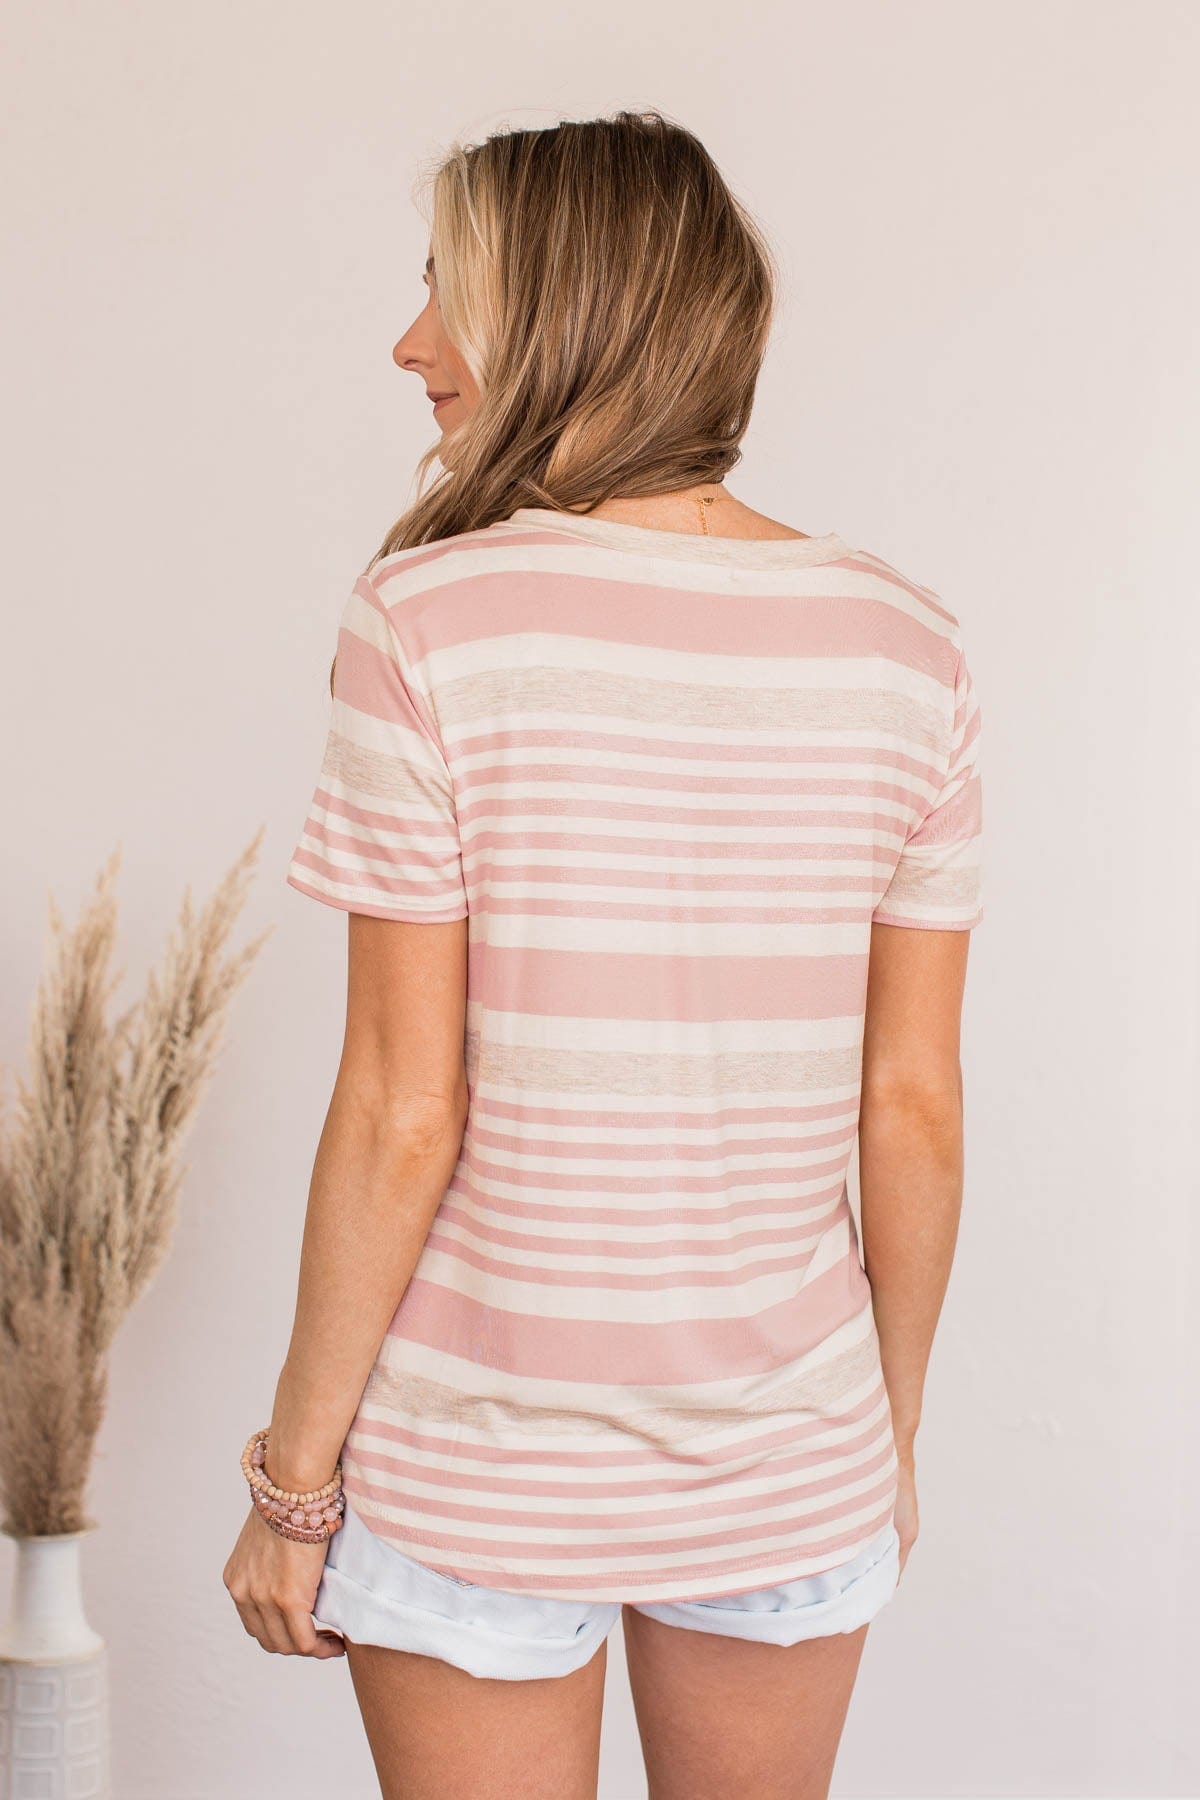 Meant For You Striped Top- Blush